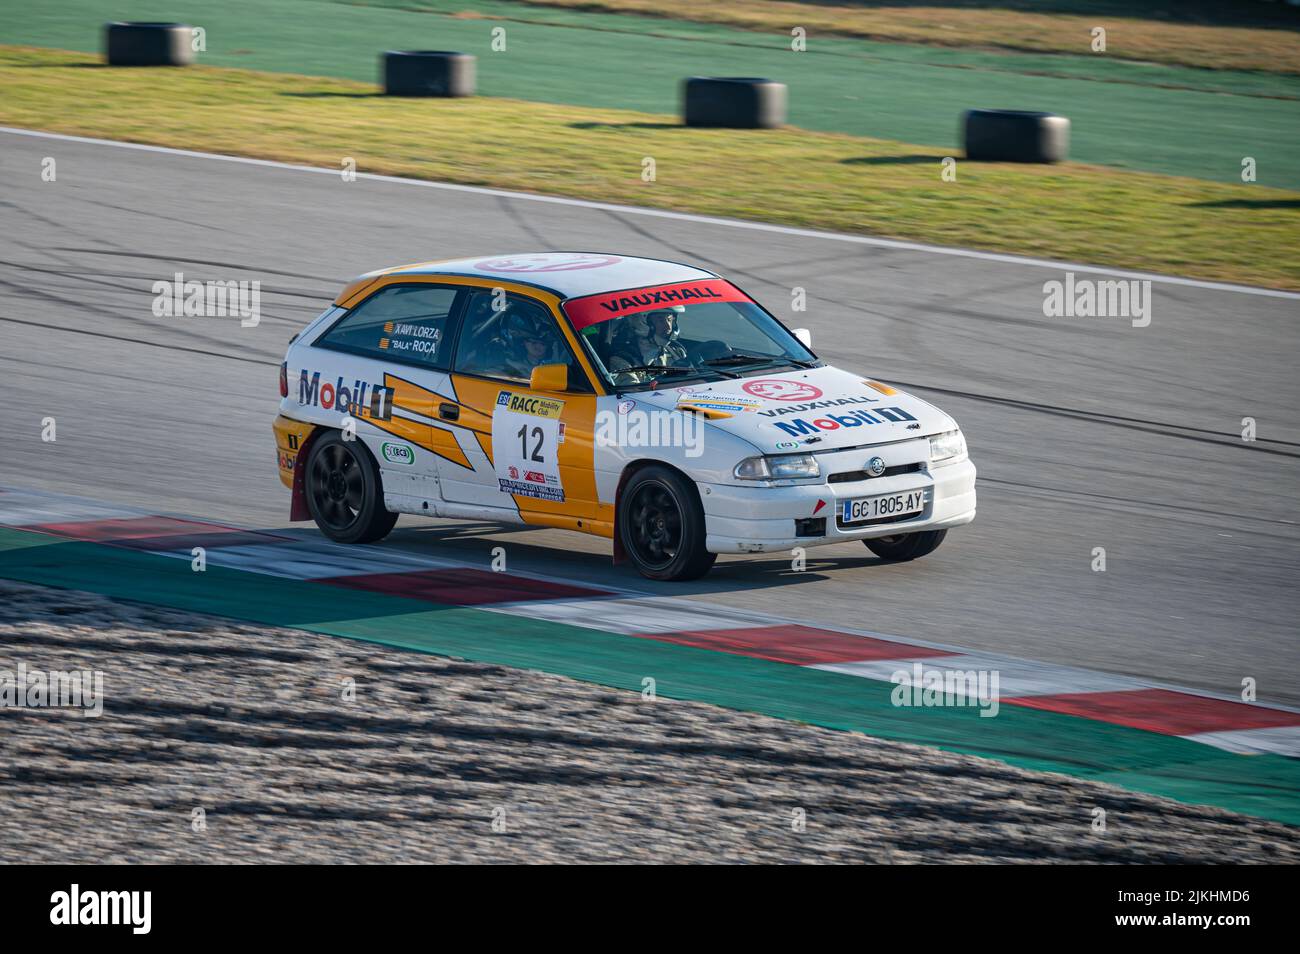 Barcelona, Spain; December 20, 2021: Opel Astra MKI Racing car in the track  of Montmelo Stock Photo - Alamy